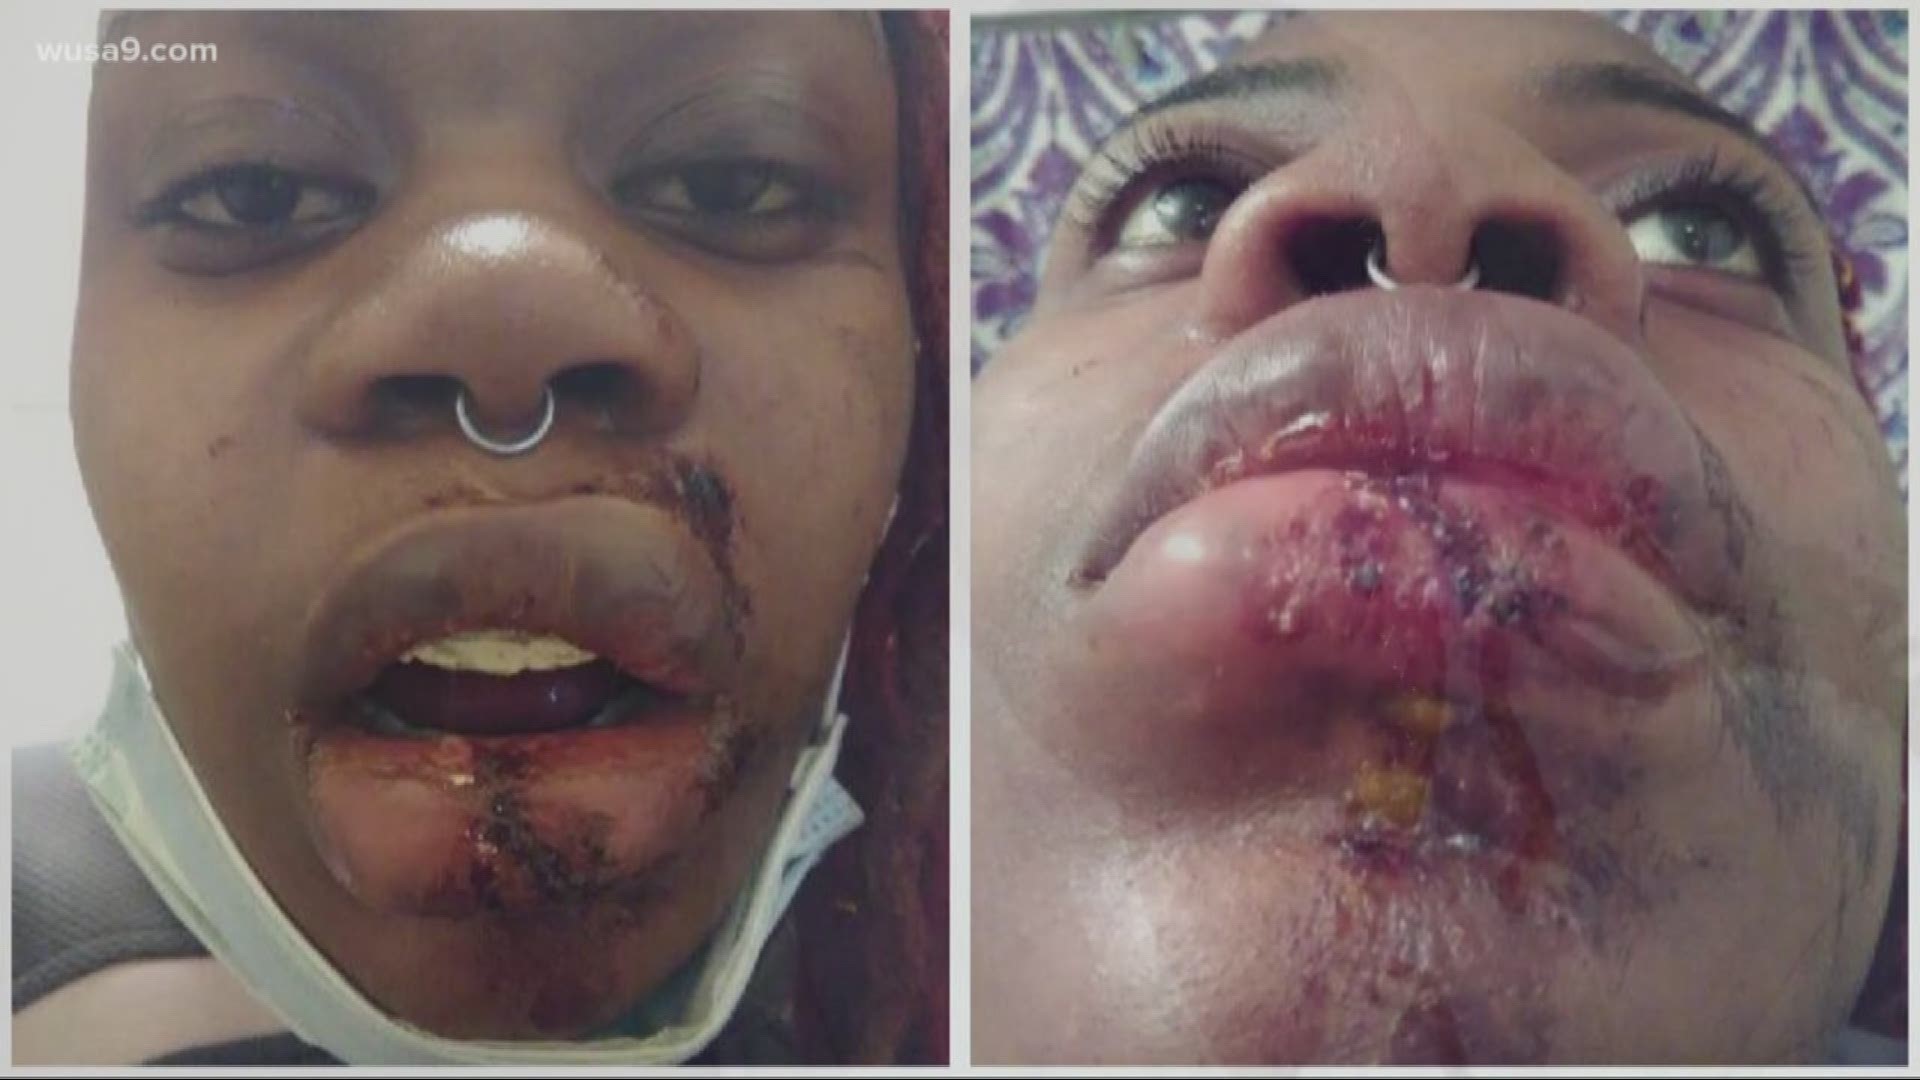 A DC woman says Metro Transit police took things too far with her.